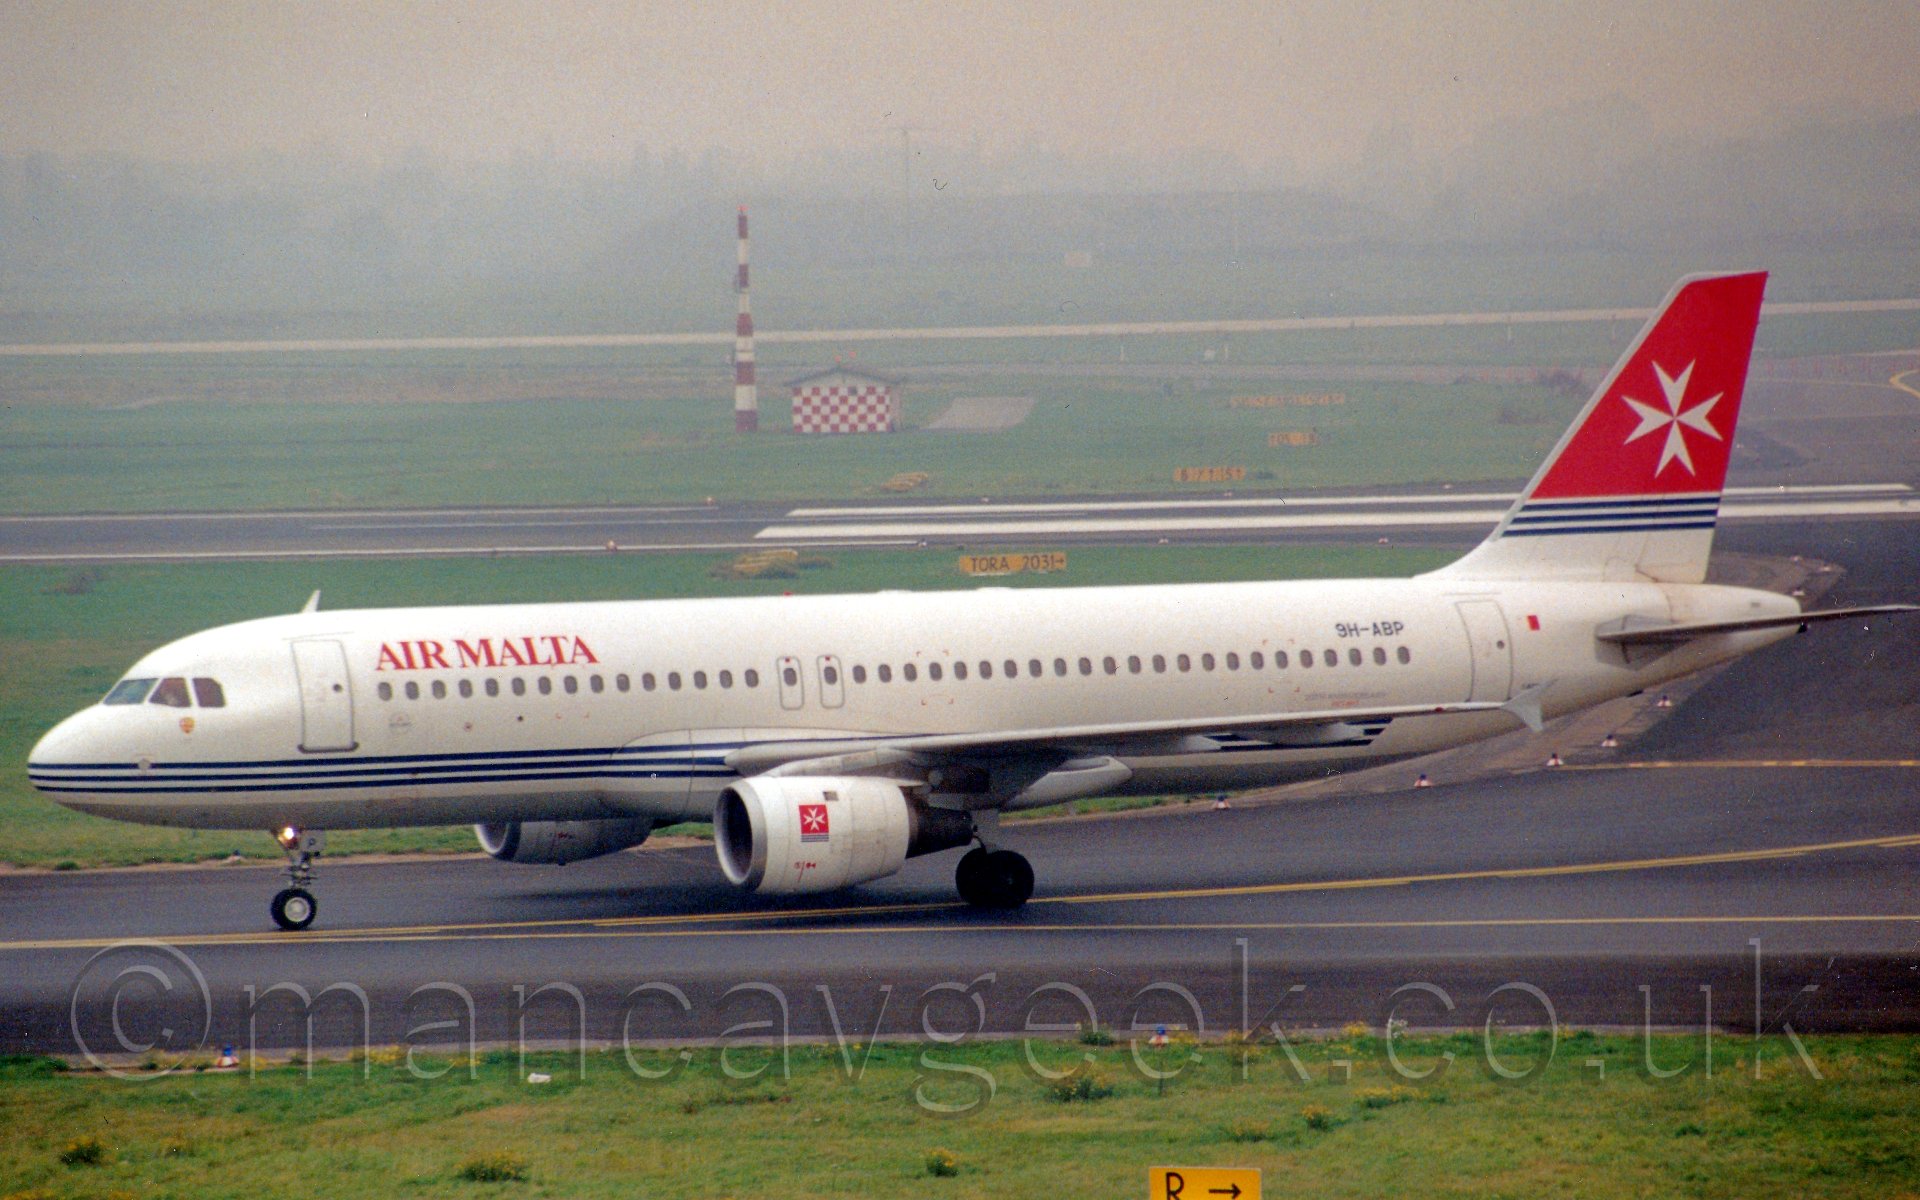 Side view of a twin engined, white jet airliner, taxiing from right to left, with grassed areas and a runway vanishing in to haze in the background.